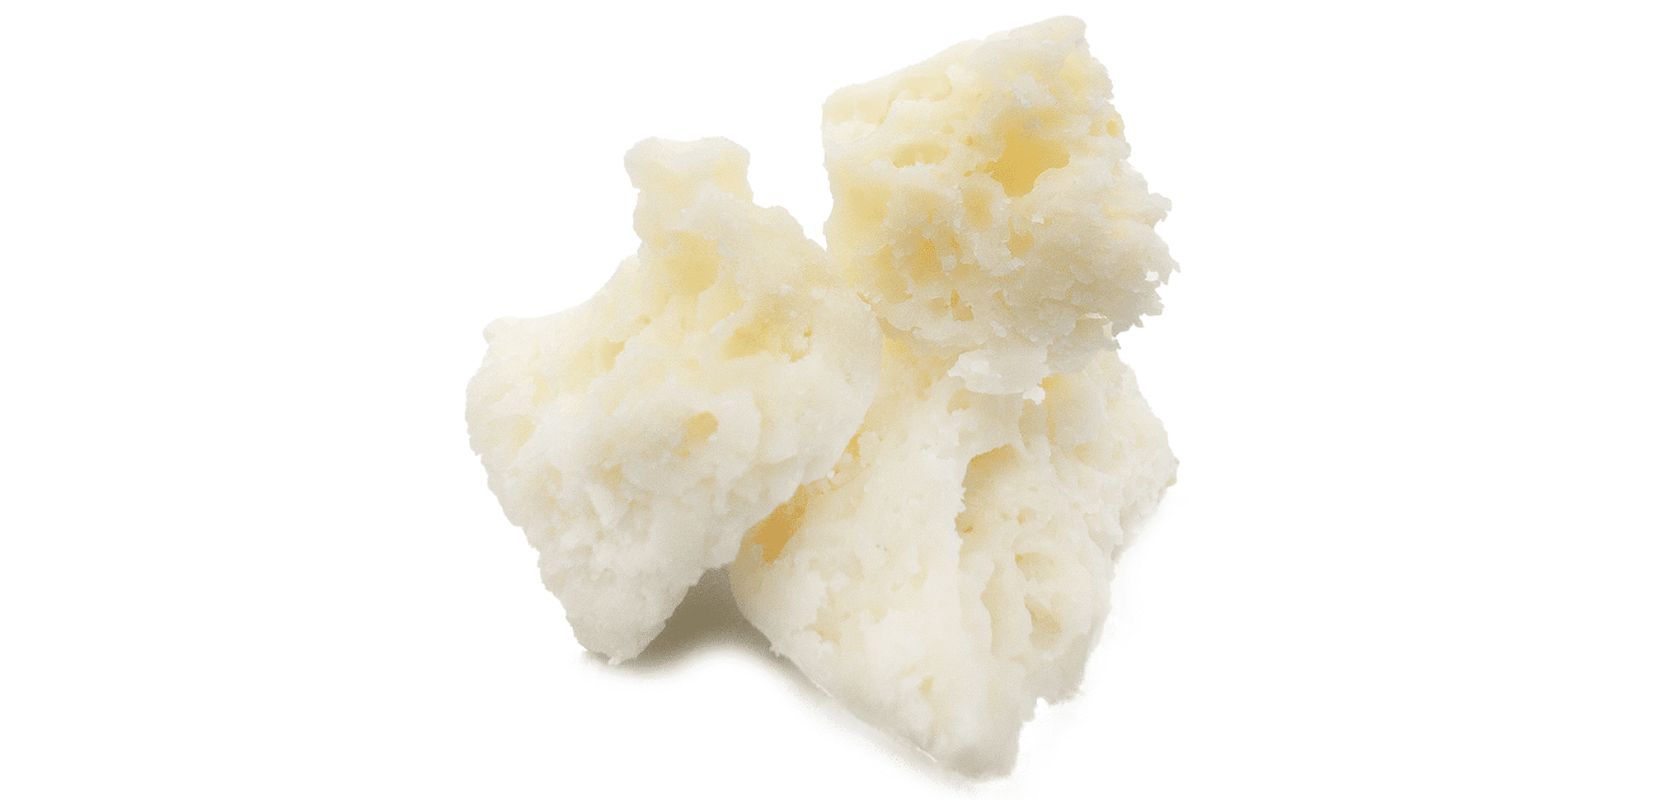 From its high potency to its versatility in consumption methods, here are some key advantages of using white crumble wax